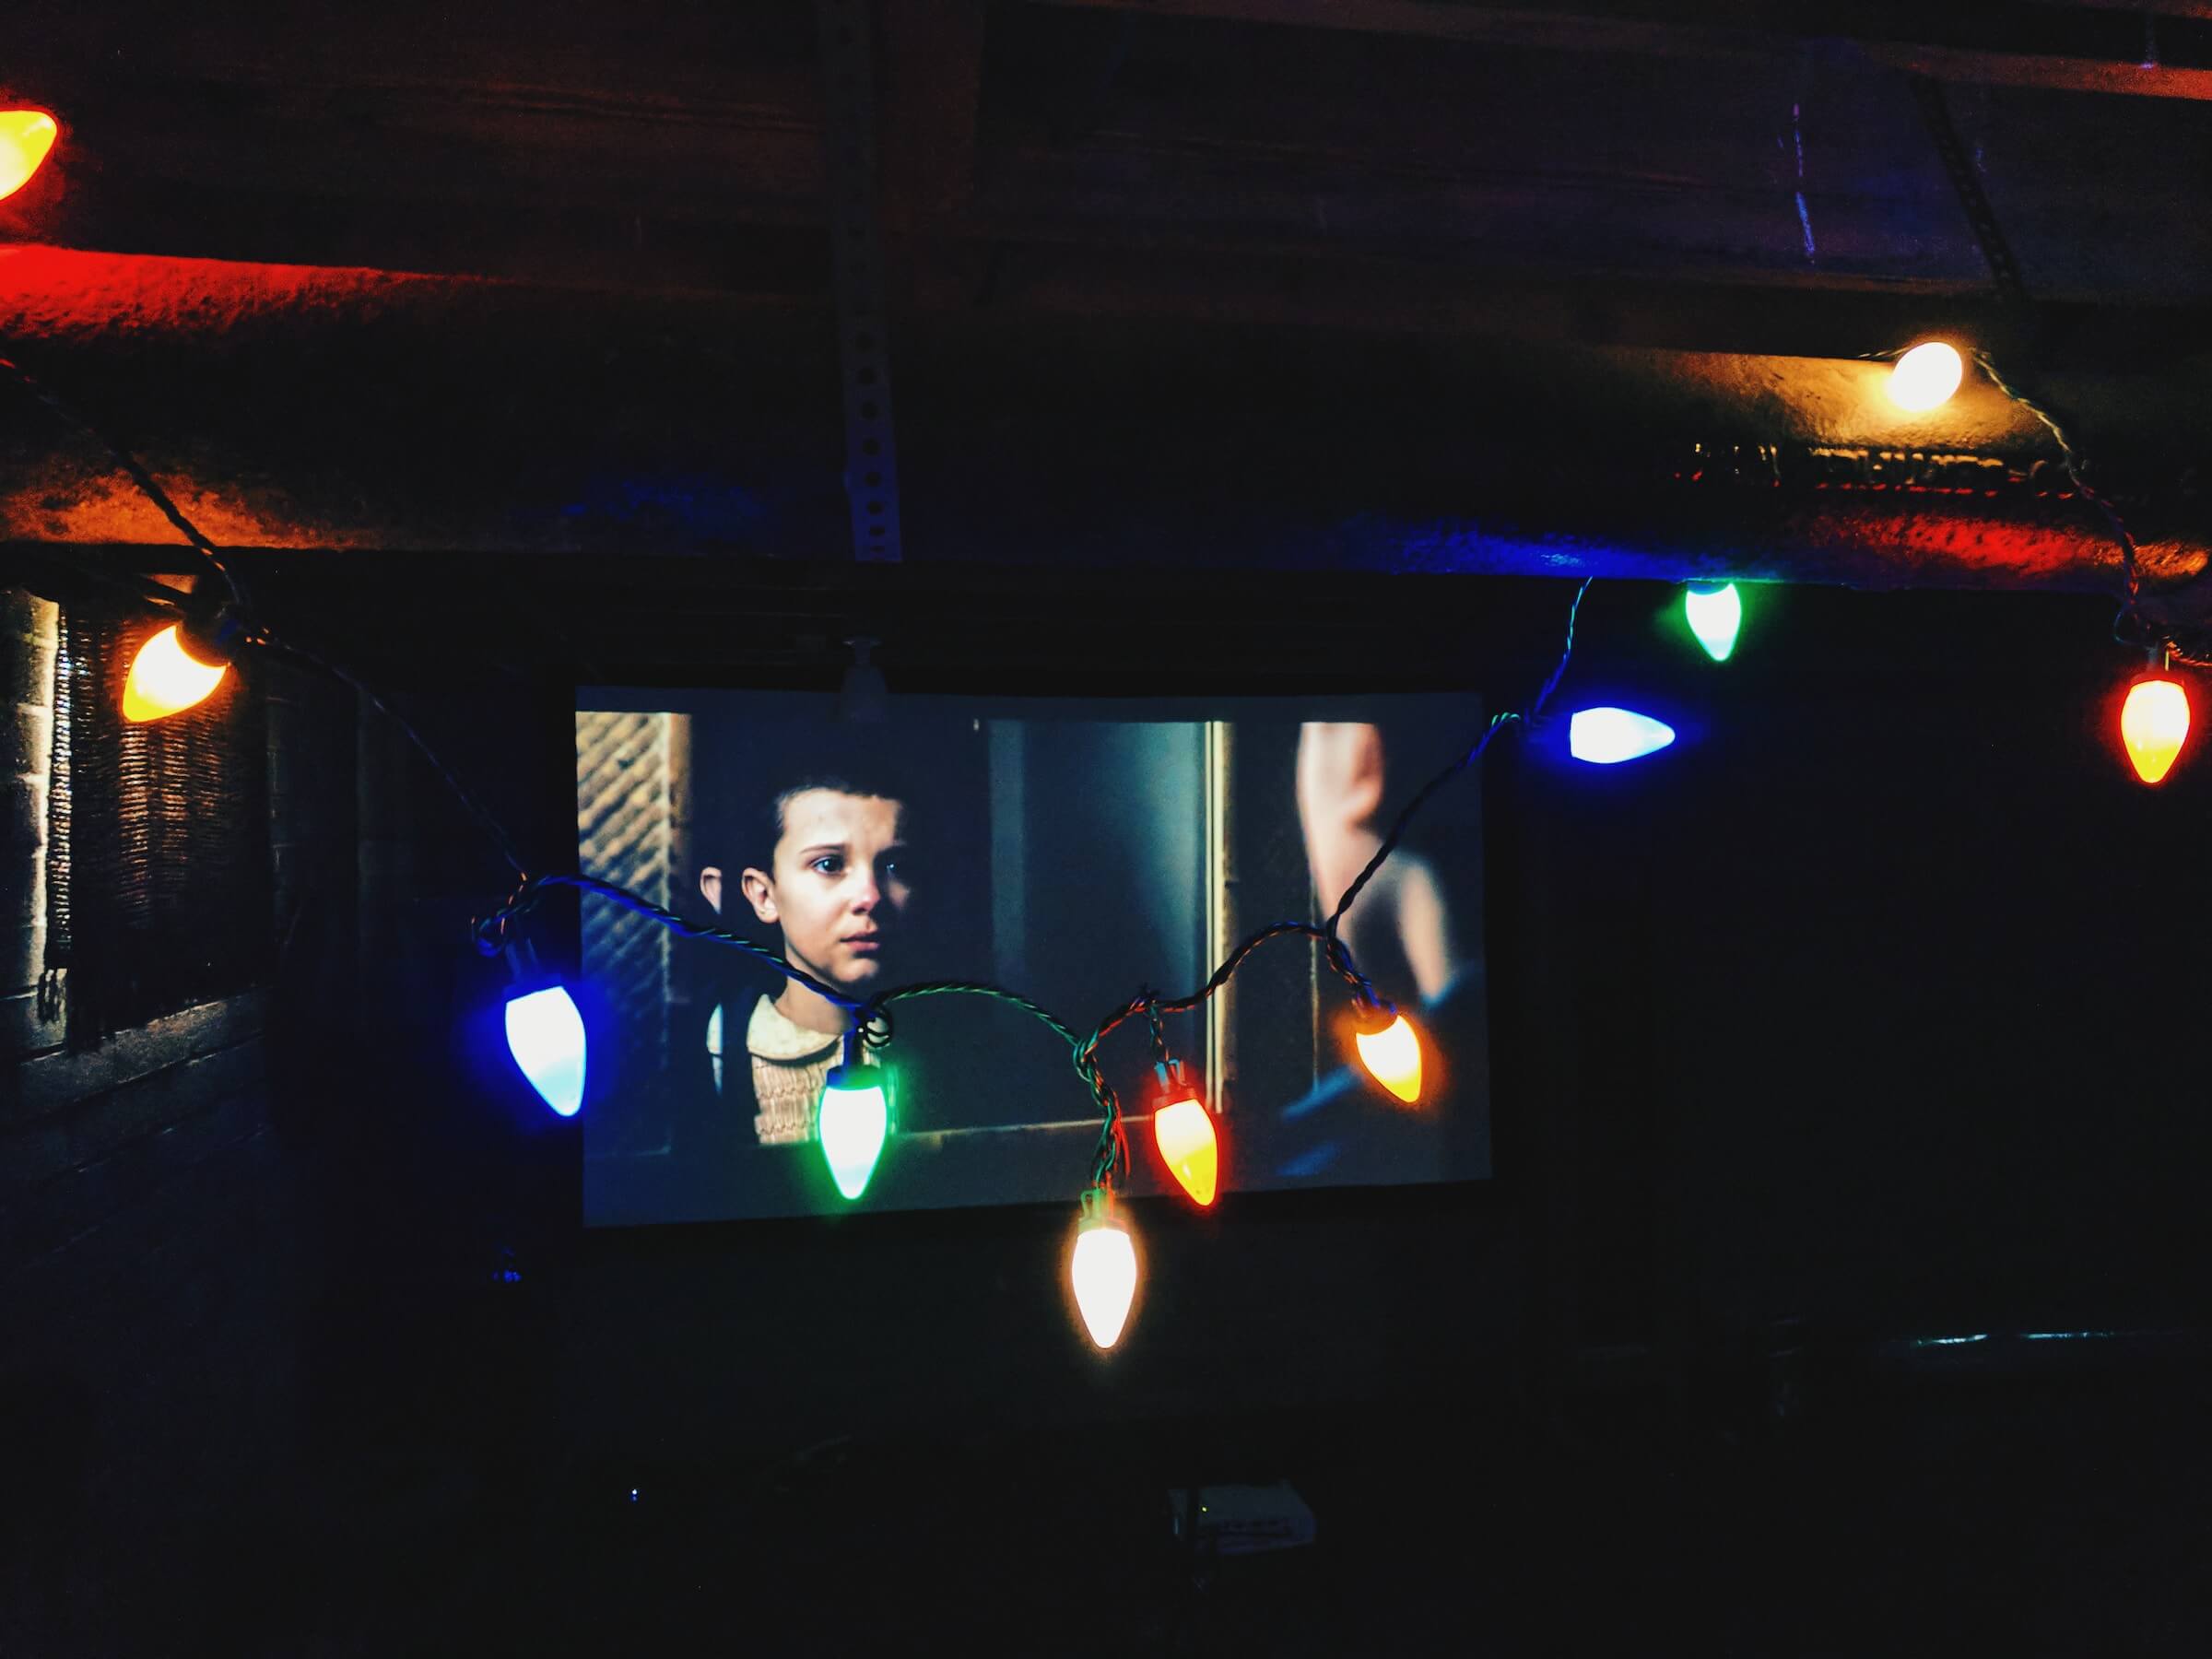 A scene from "Stranger Things" on a screen; a string of Christmas lights hang in front of the screen.